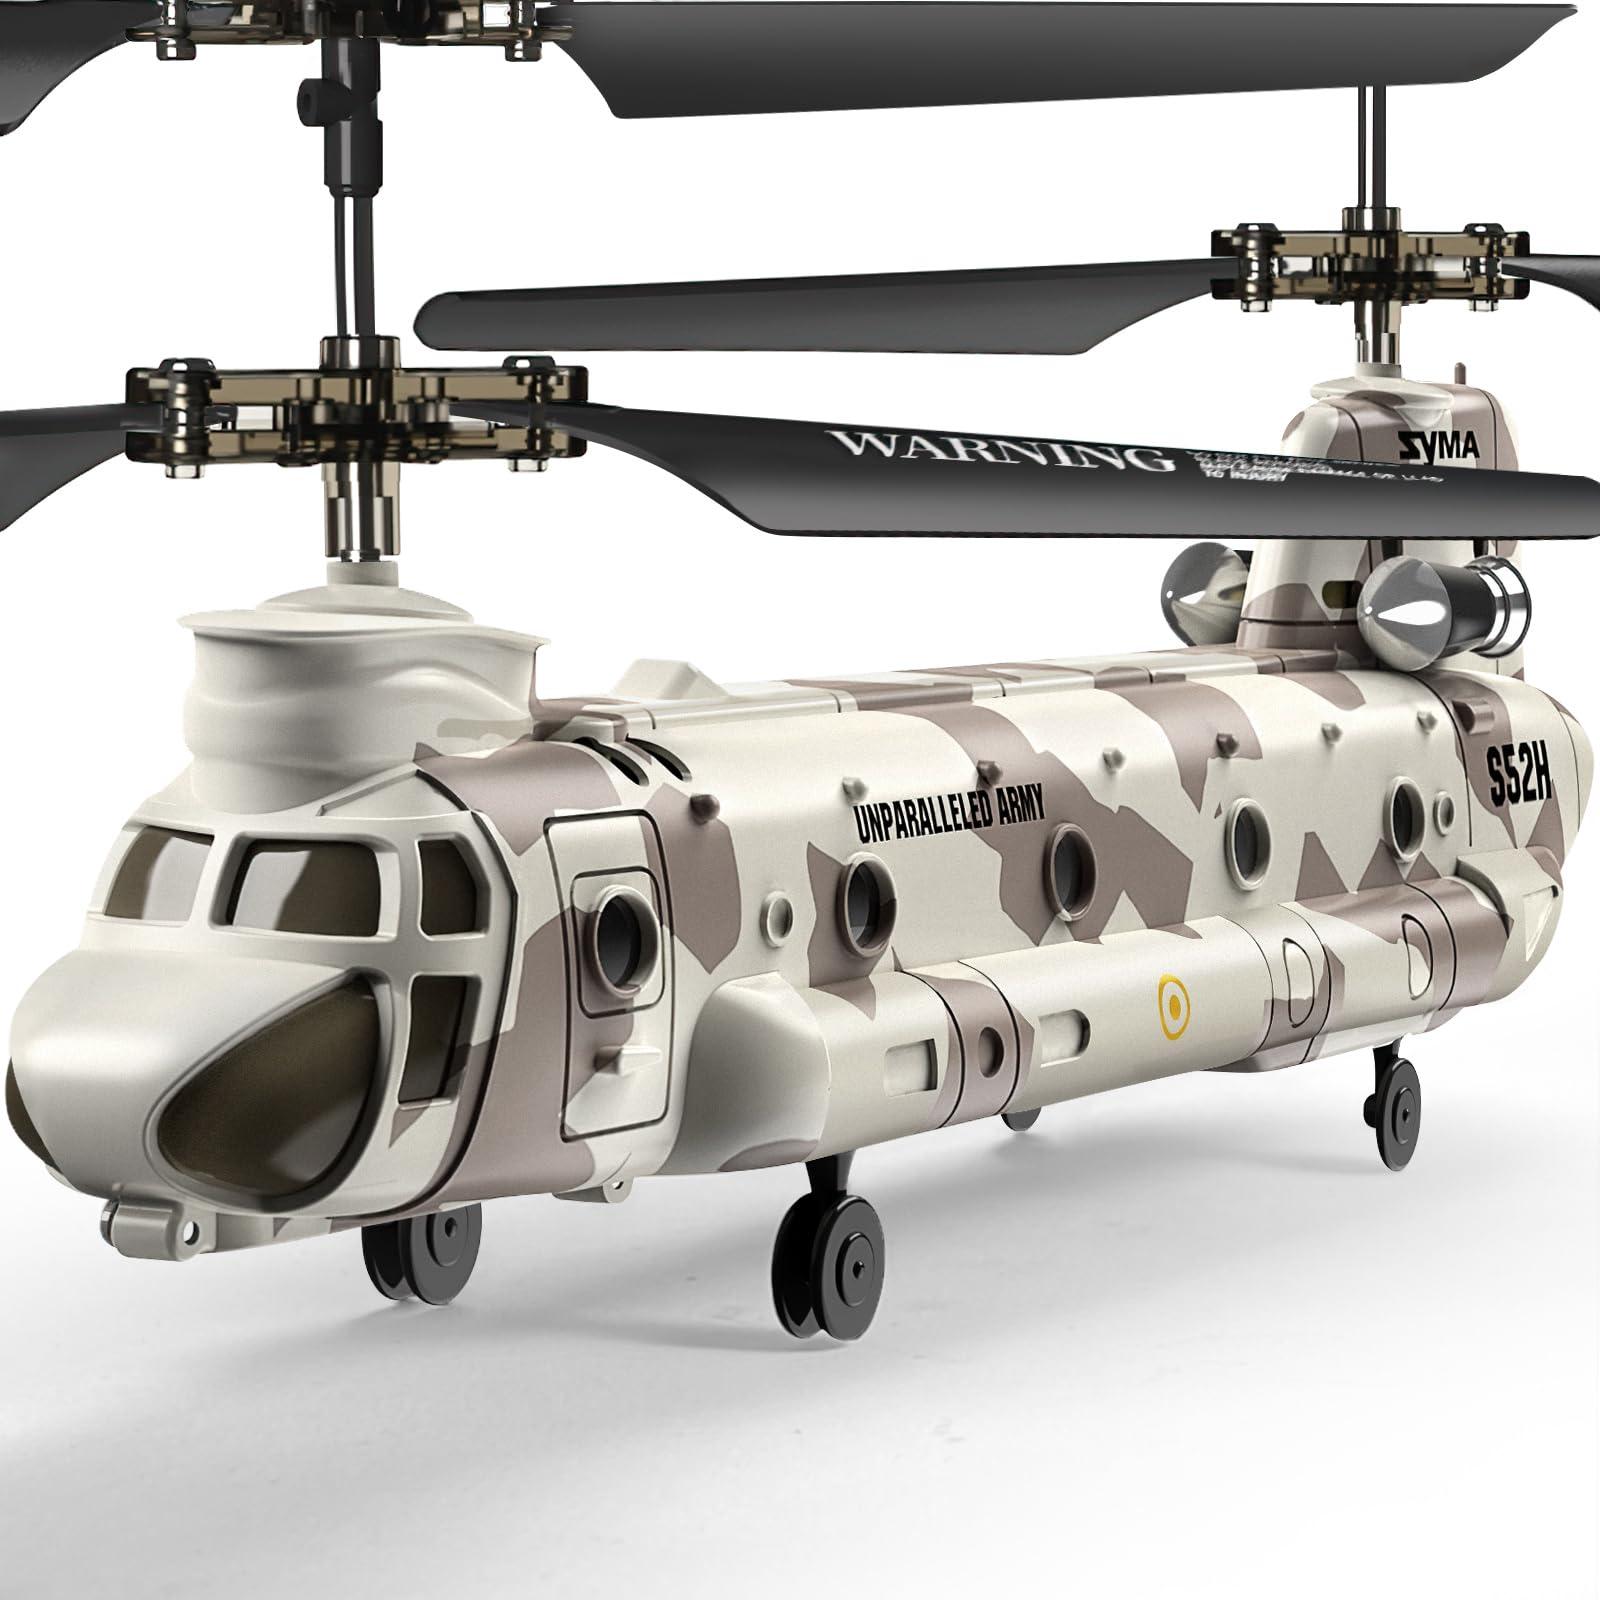 Super Ch 47 Chinook Rc Helicopter: Enhance Your Flying Experience with the Super CH-47 Chinook RC Helicopter